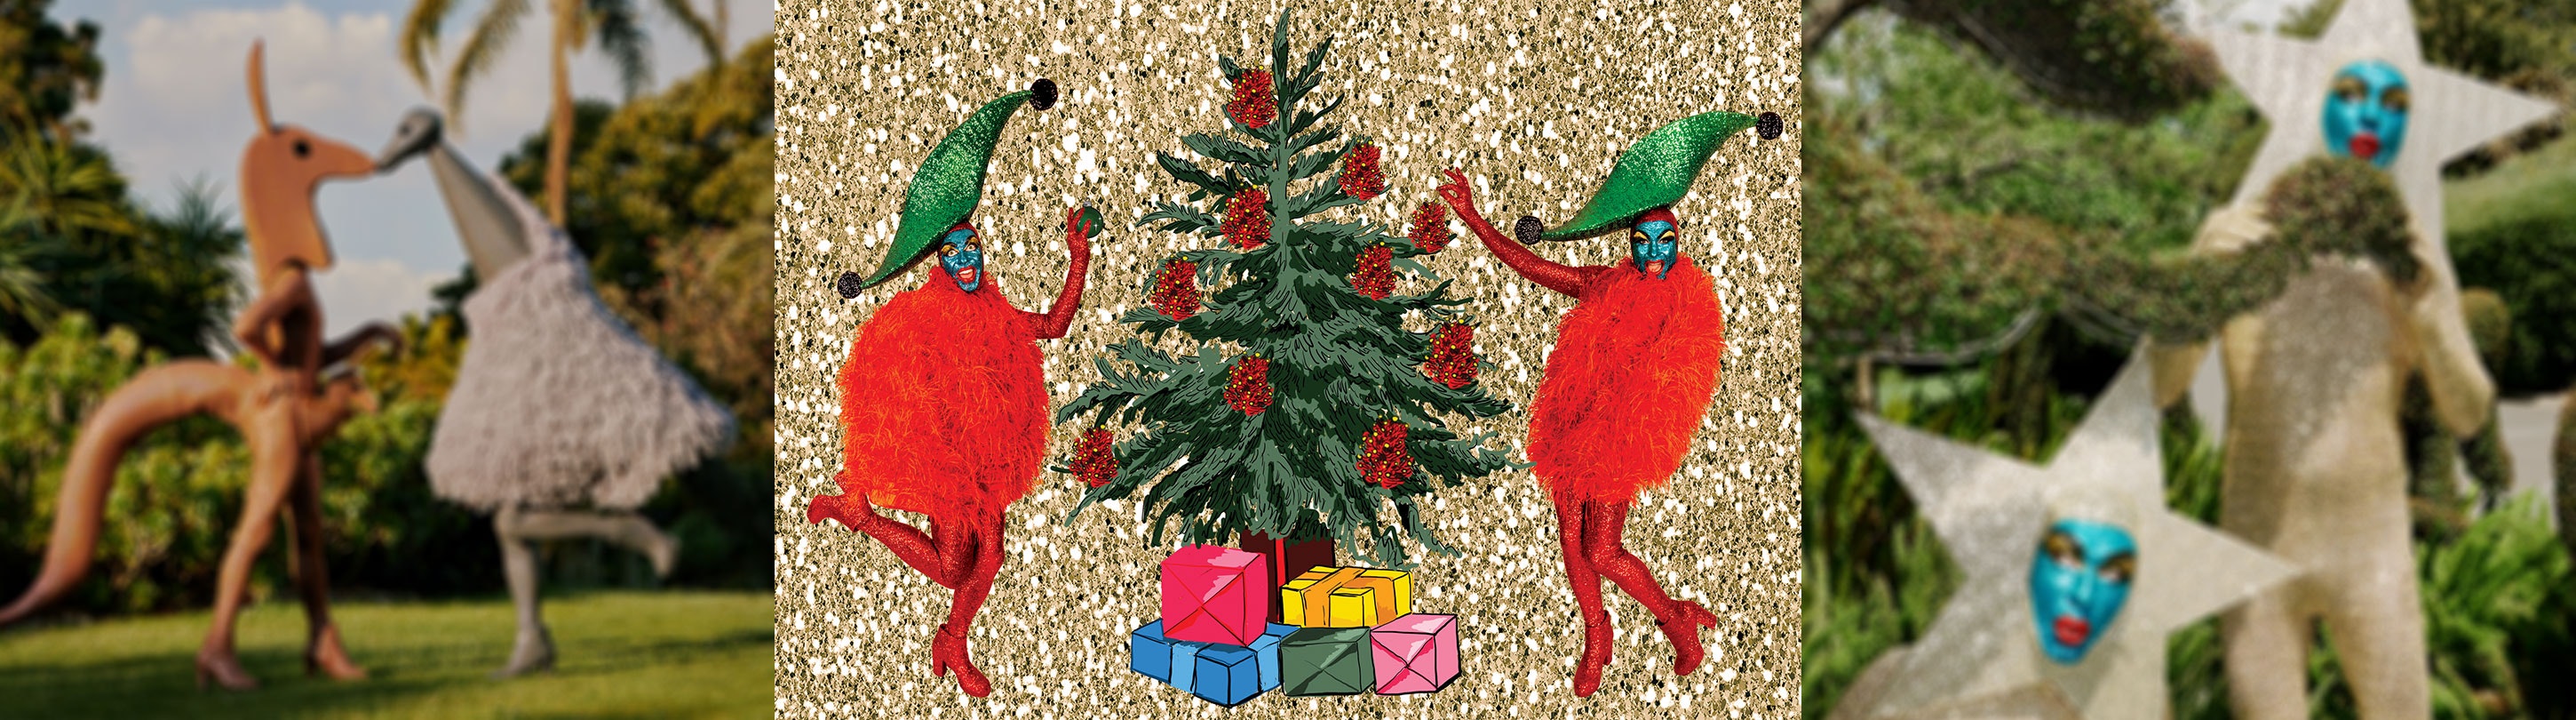 An image of two people dressed in fluffy read blobs with shiny red pants and shoes and a weird shiny green hat, there is a shaded drawing of a Christmas tree in between them and the overall background of the image is gold sparkles